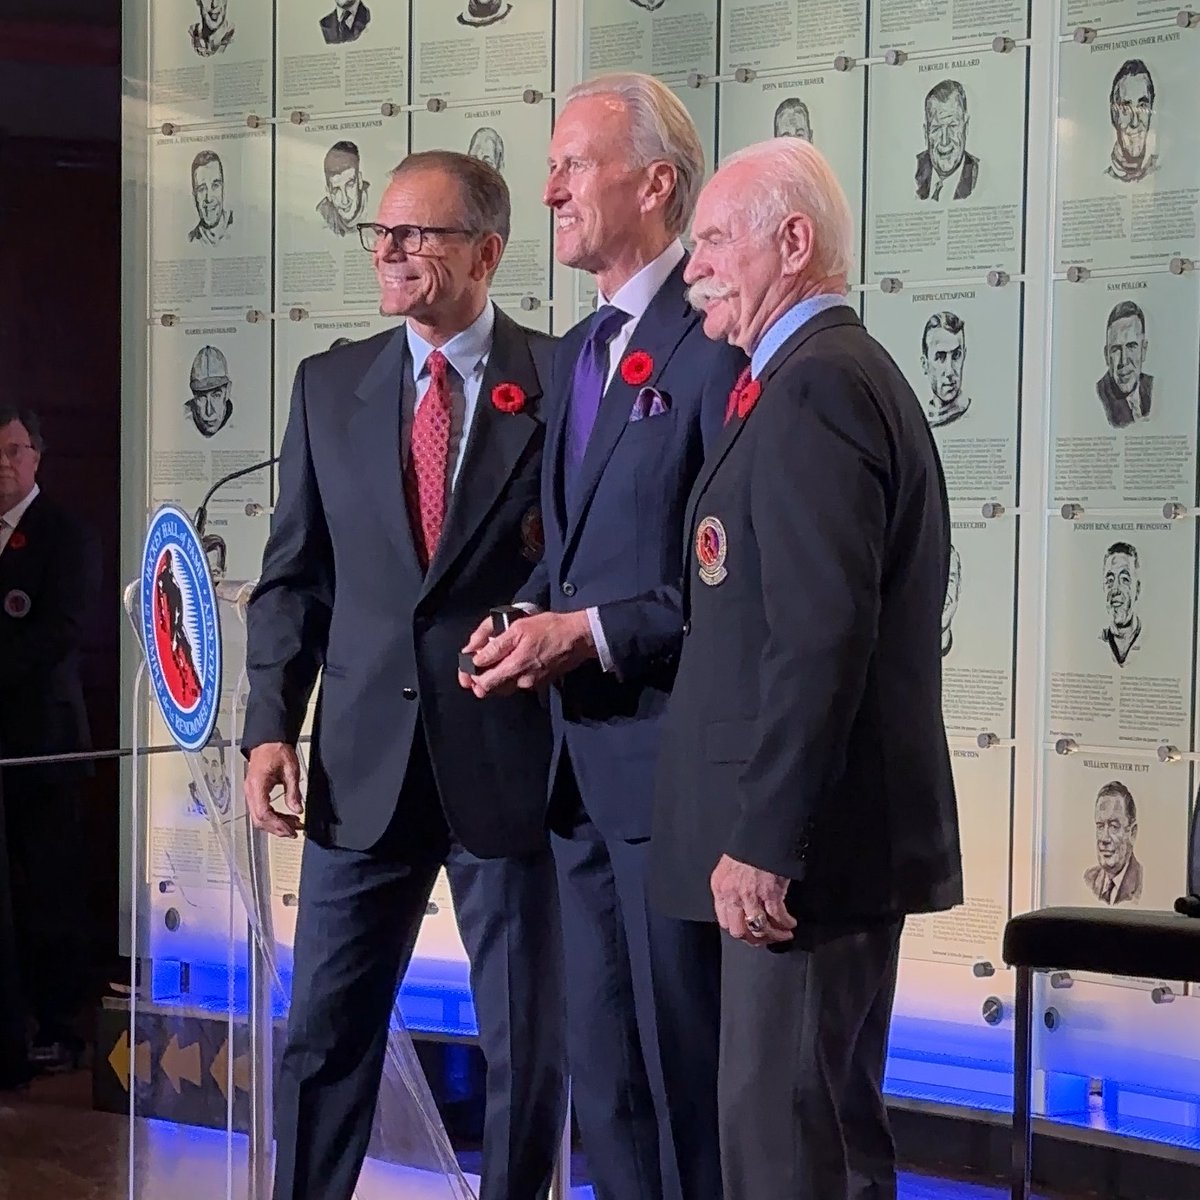 Tom Barrasso receives his Honoured Member Ring by @BaronRings from Mike Gartner #HHOF2001, Chair of the Selection Committee  and Lanny McDonald #HHOF1992, Chair of the Board

#HHOF2023 | #HHOF